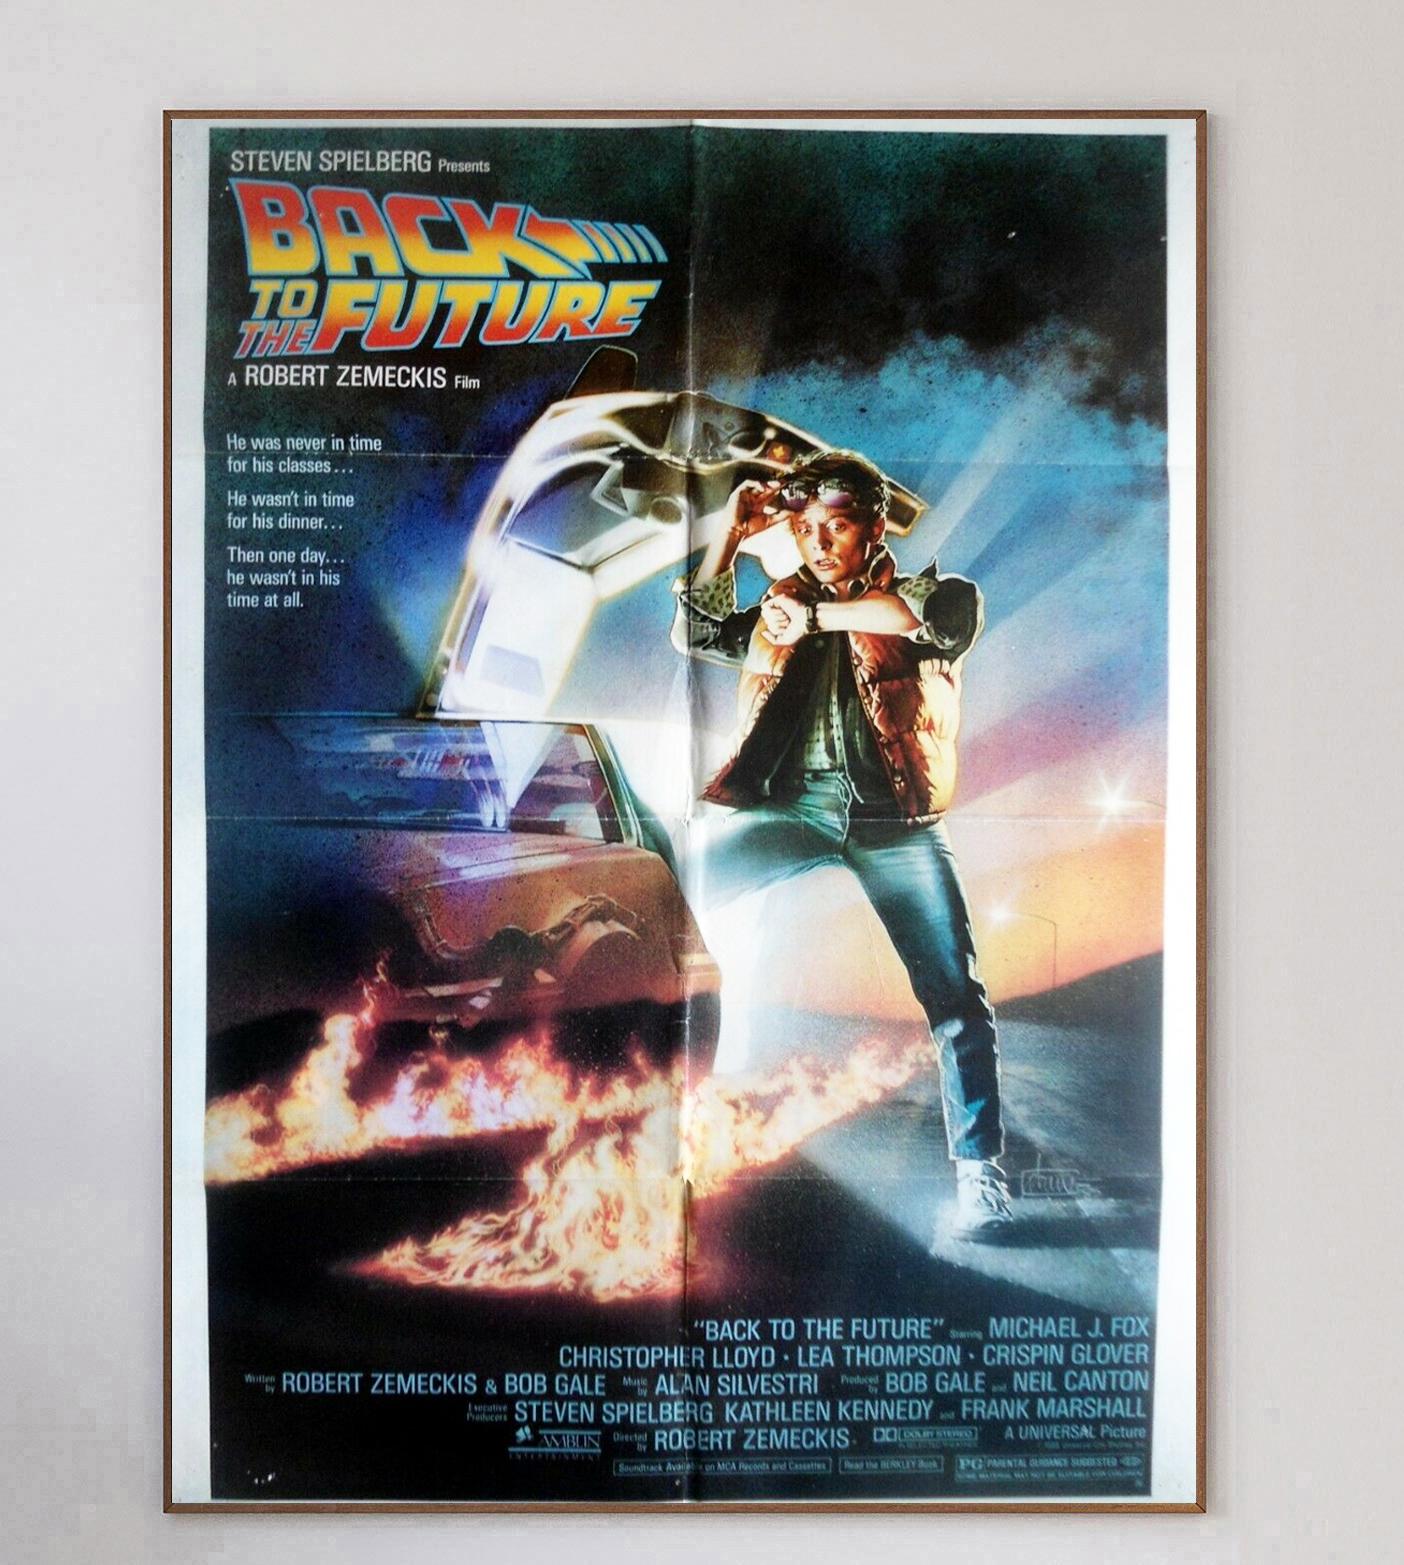 The Robert Zemeckis directed Back to the Future came flying into cinemas at 88mph in 1985. The time travelling tale that made Michael J. Fox a superstar and the DeLorean the must-have car is now regarded as one of the greatest films of all time and